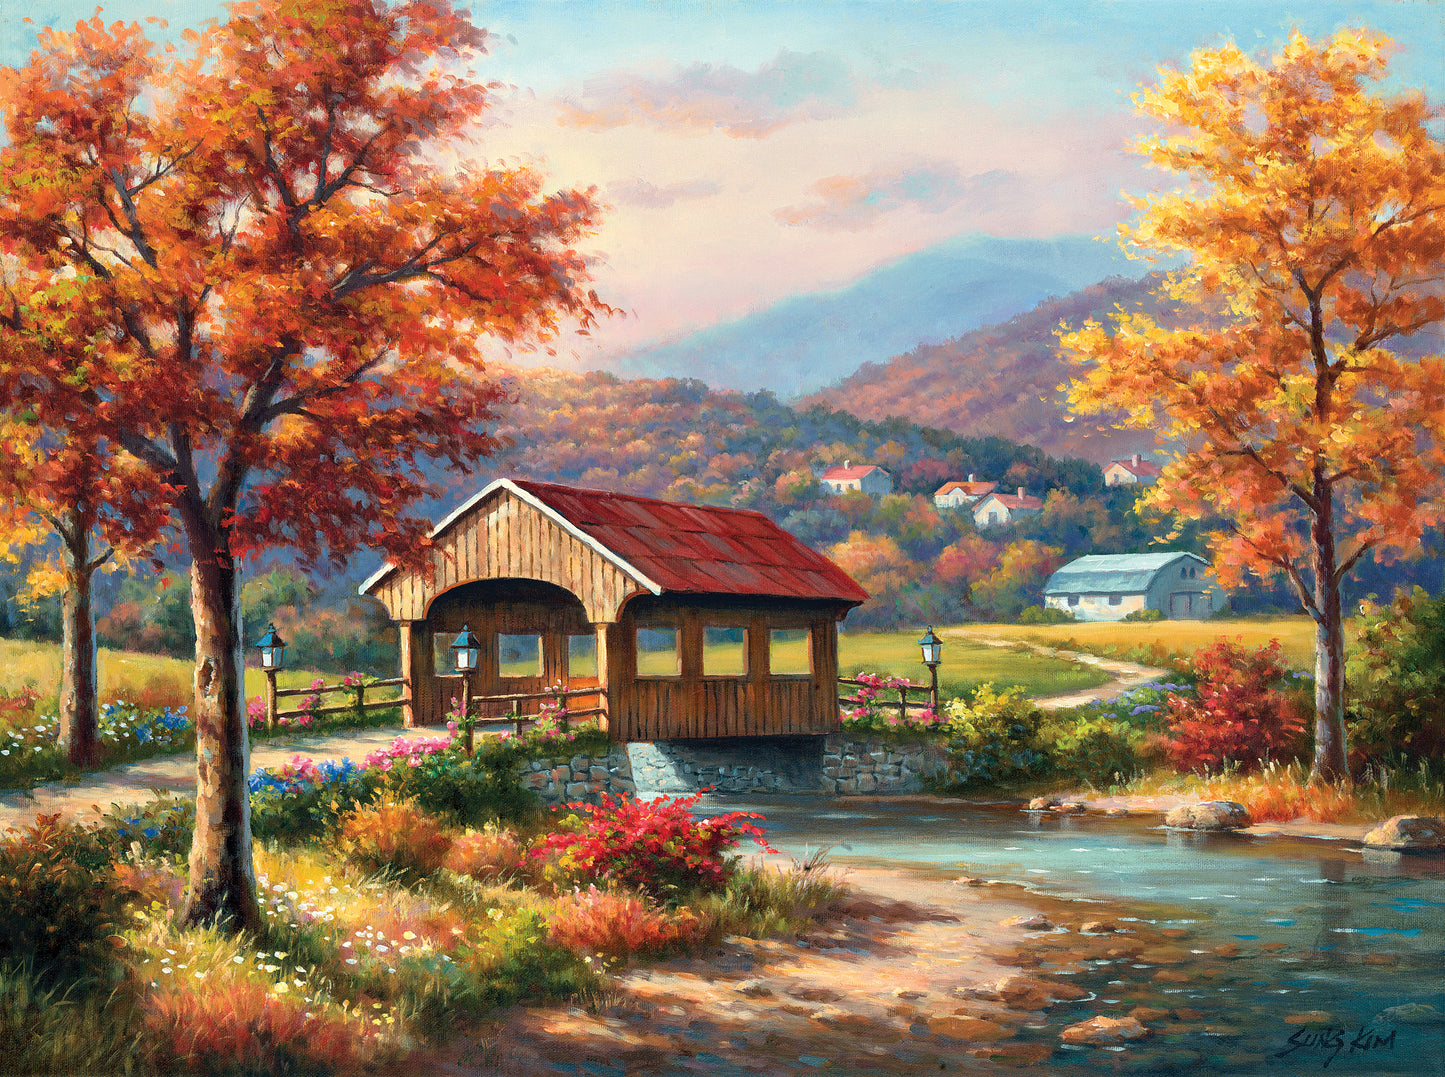 Fall at the Covered Bridge - 1000 Piece Jigsaw Puzzle